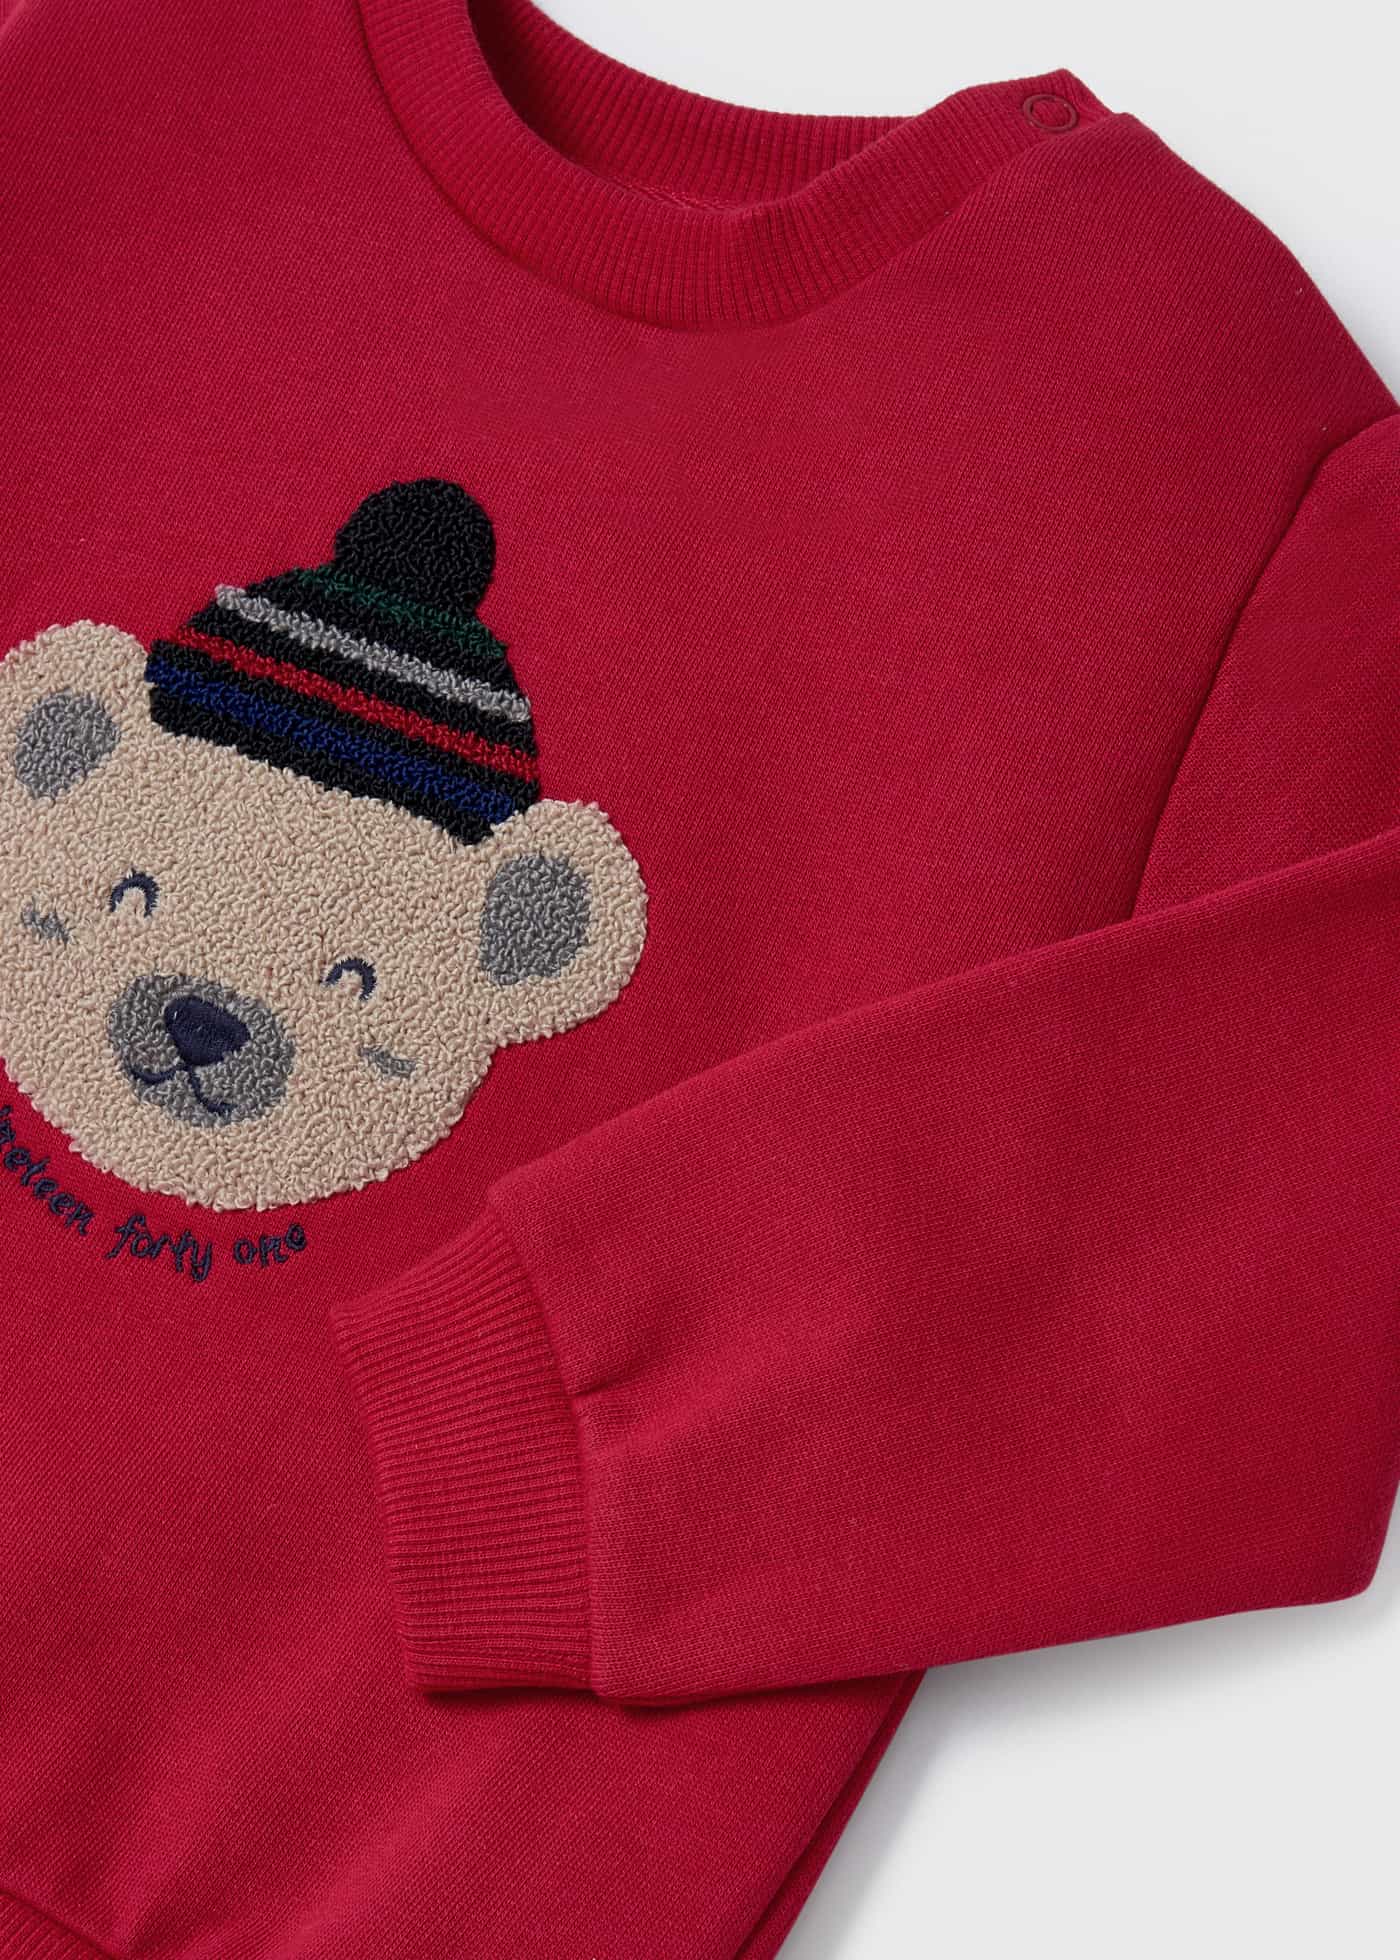 MAY - Mayoral Usa Inc Mayoral Embroidered Pullover - Little Miss Muffin Children & Home